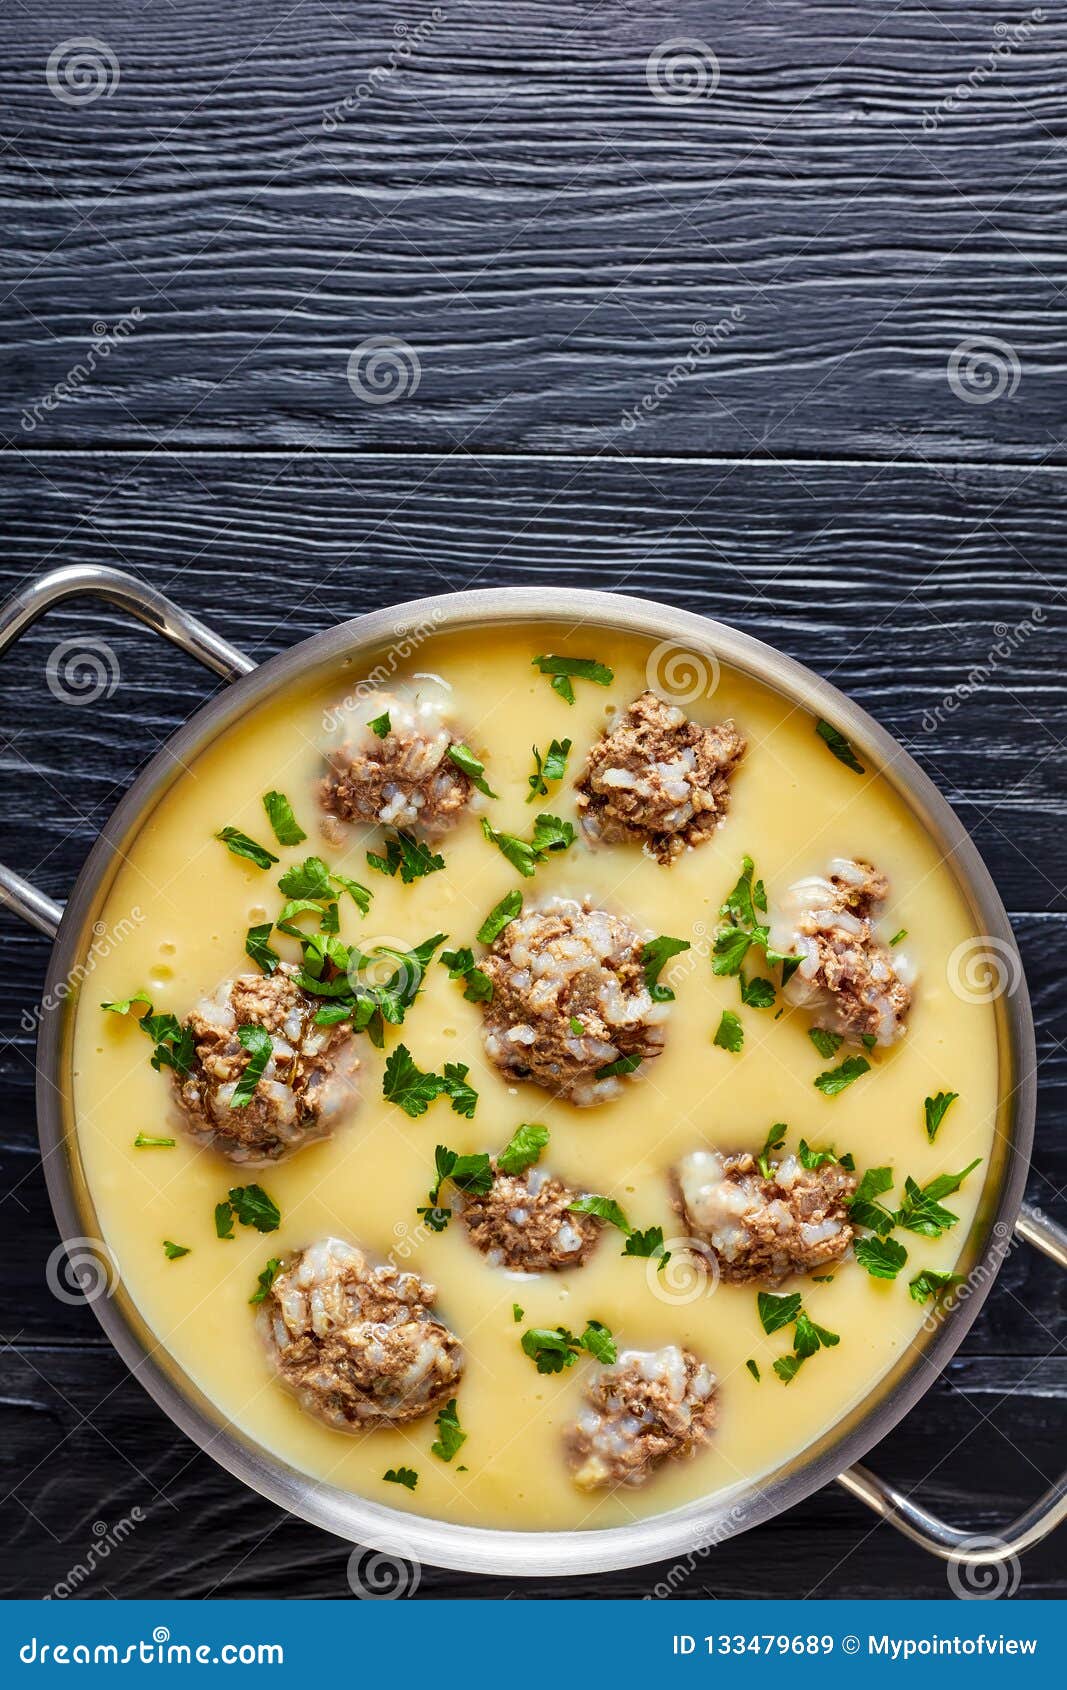 Greek Meatball Soup Giouvarlakia, Vertical View Stock Image - Image of ...